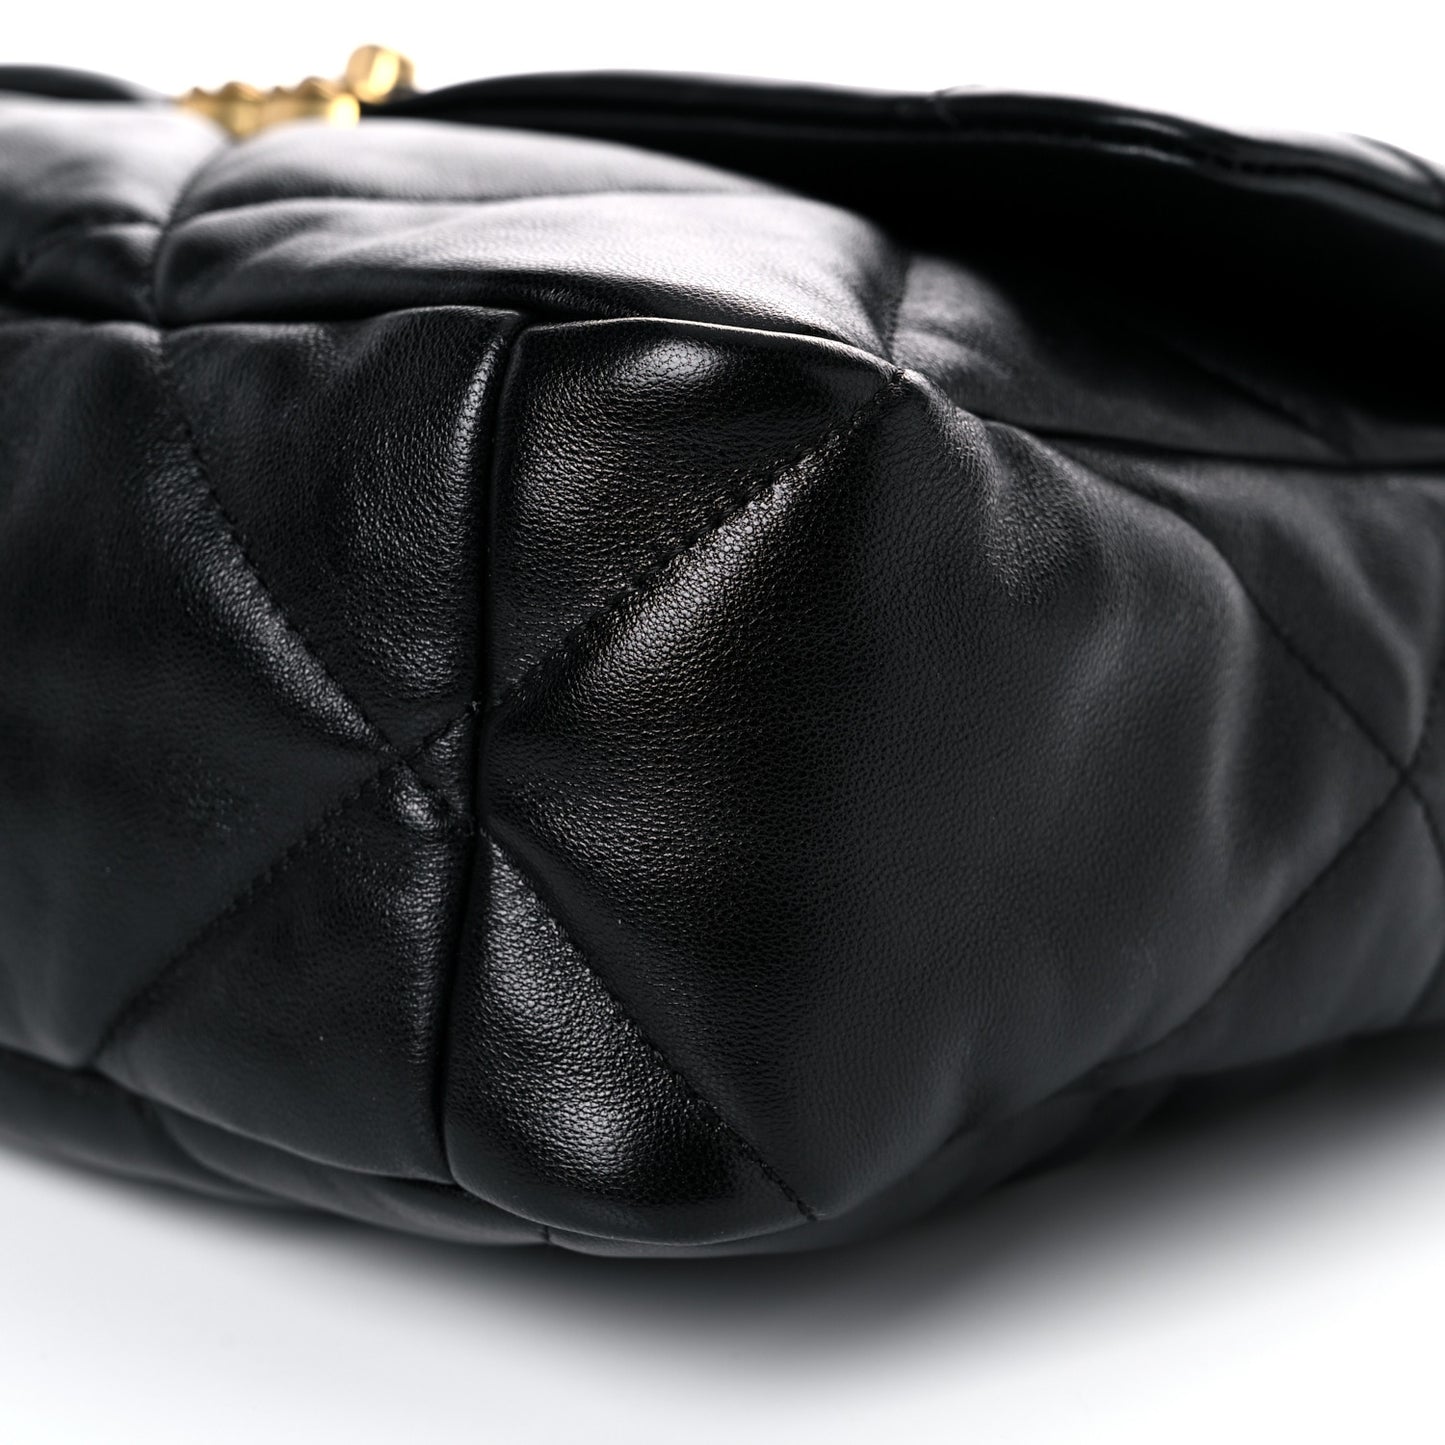 Lambskin Quilted Large Chanel 19 Flap Black